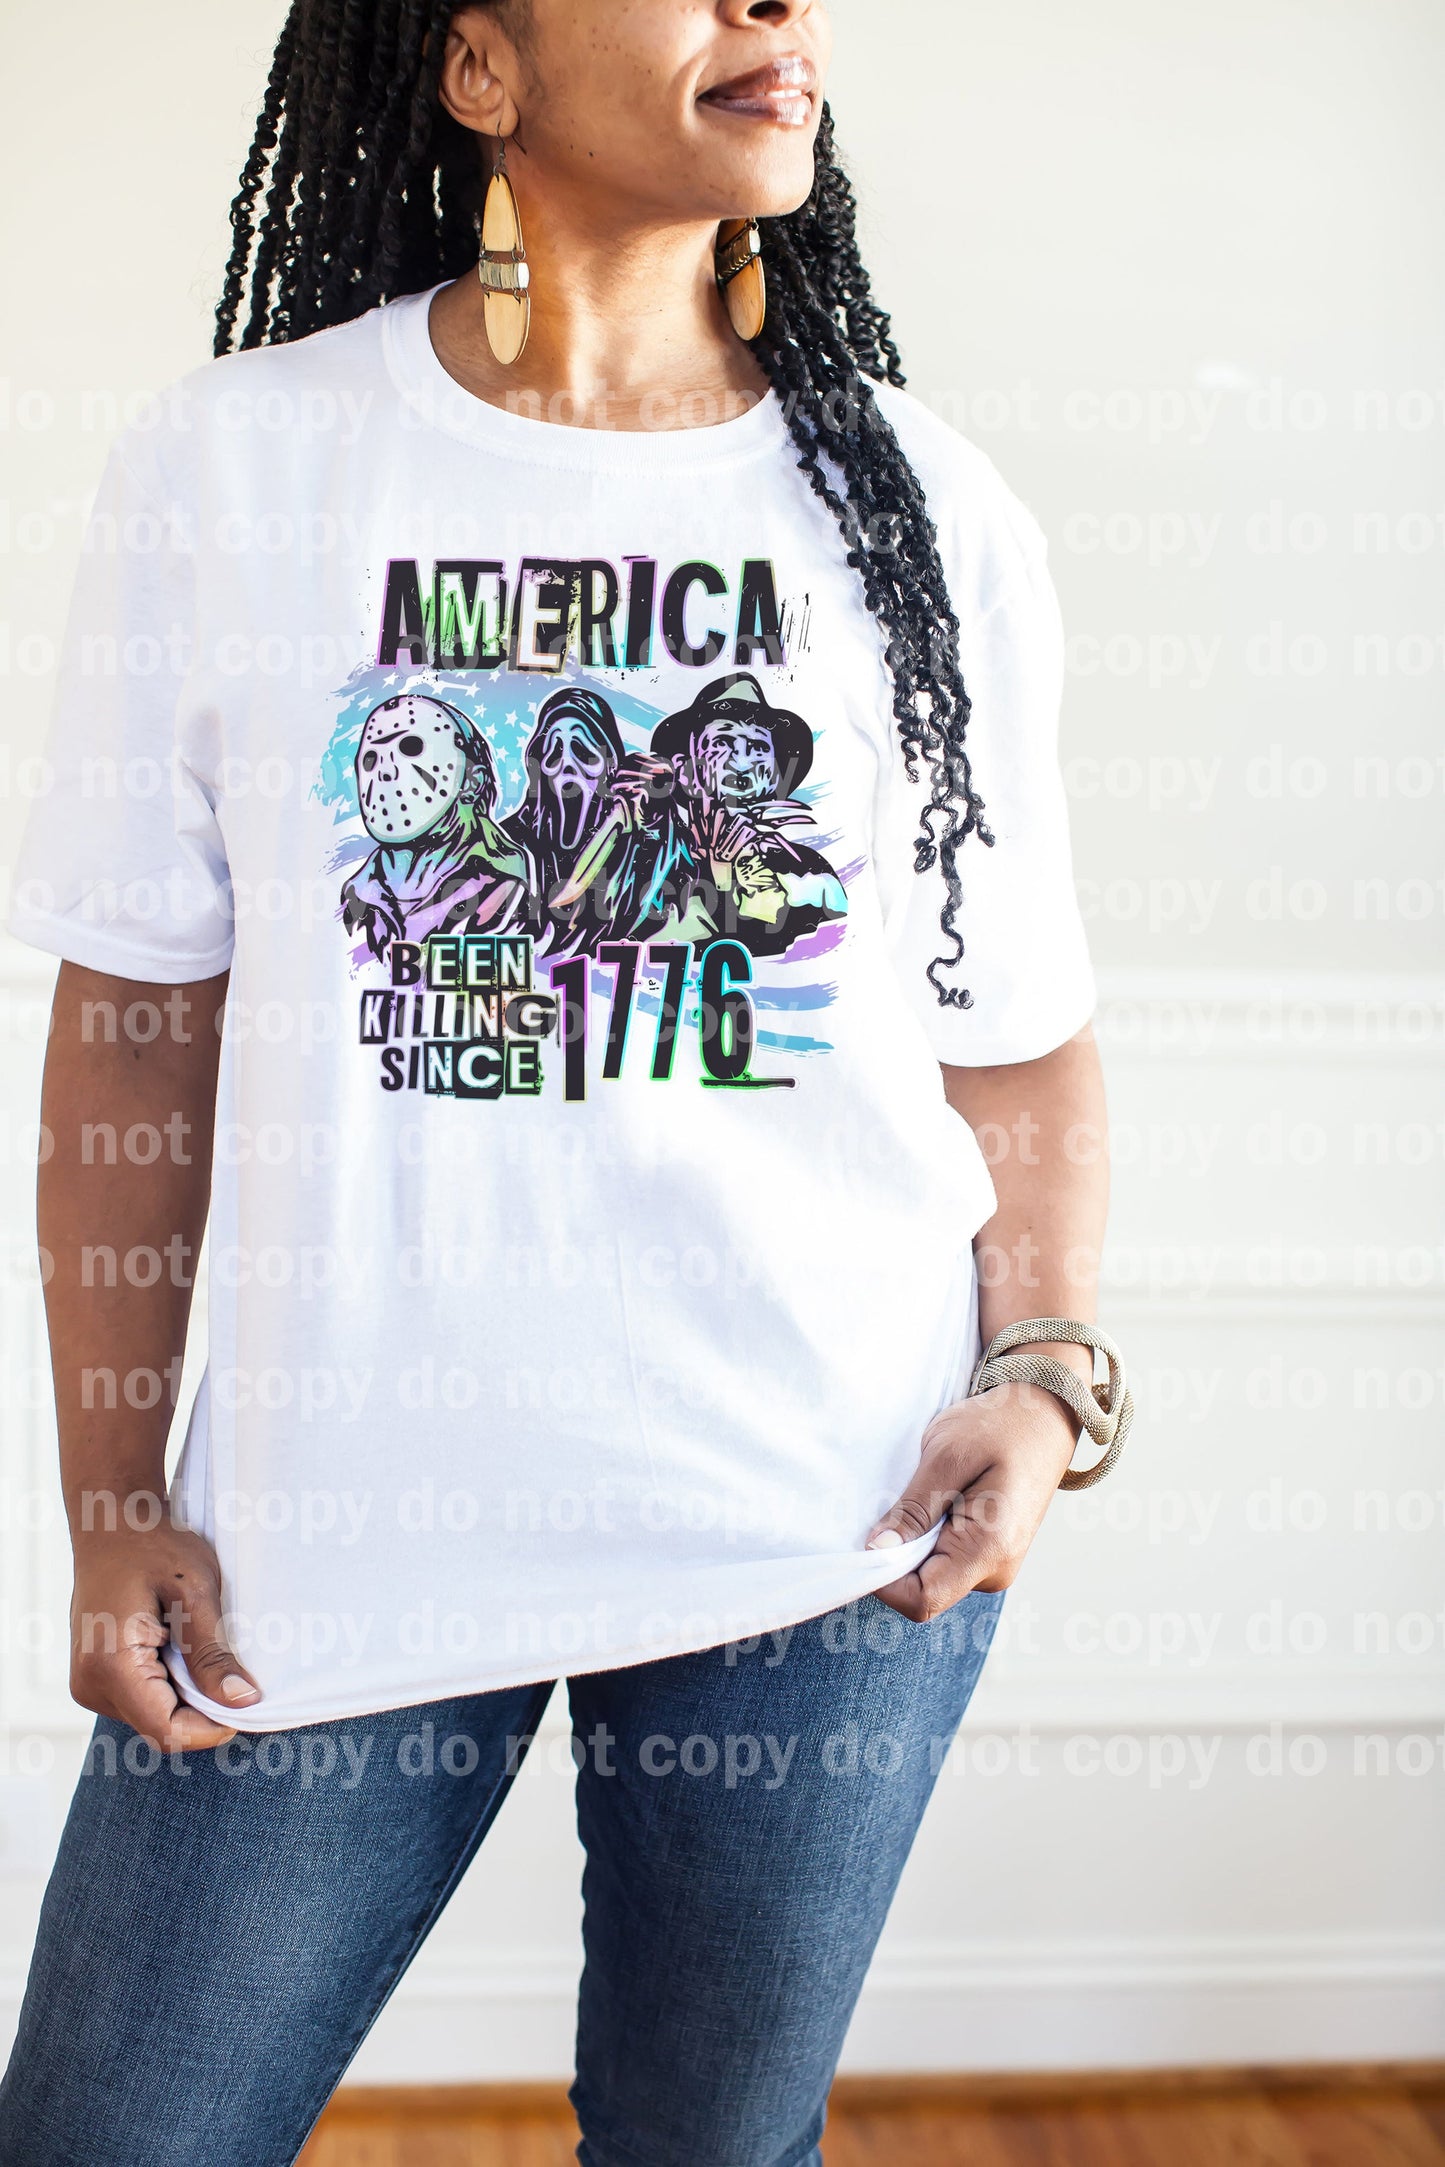 America Been Killing Since 1776 Dream Print or Sublimation Print